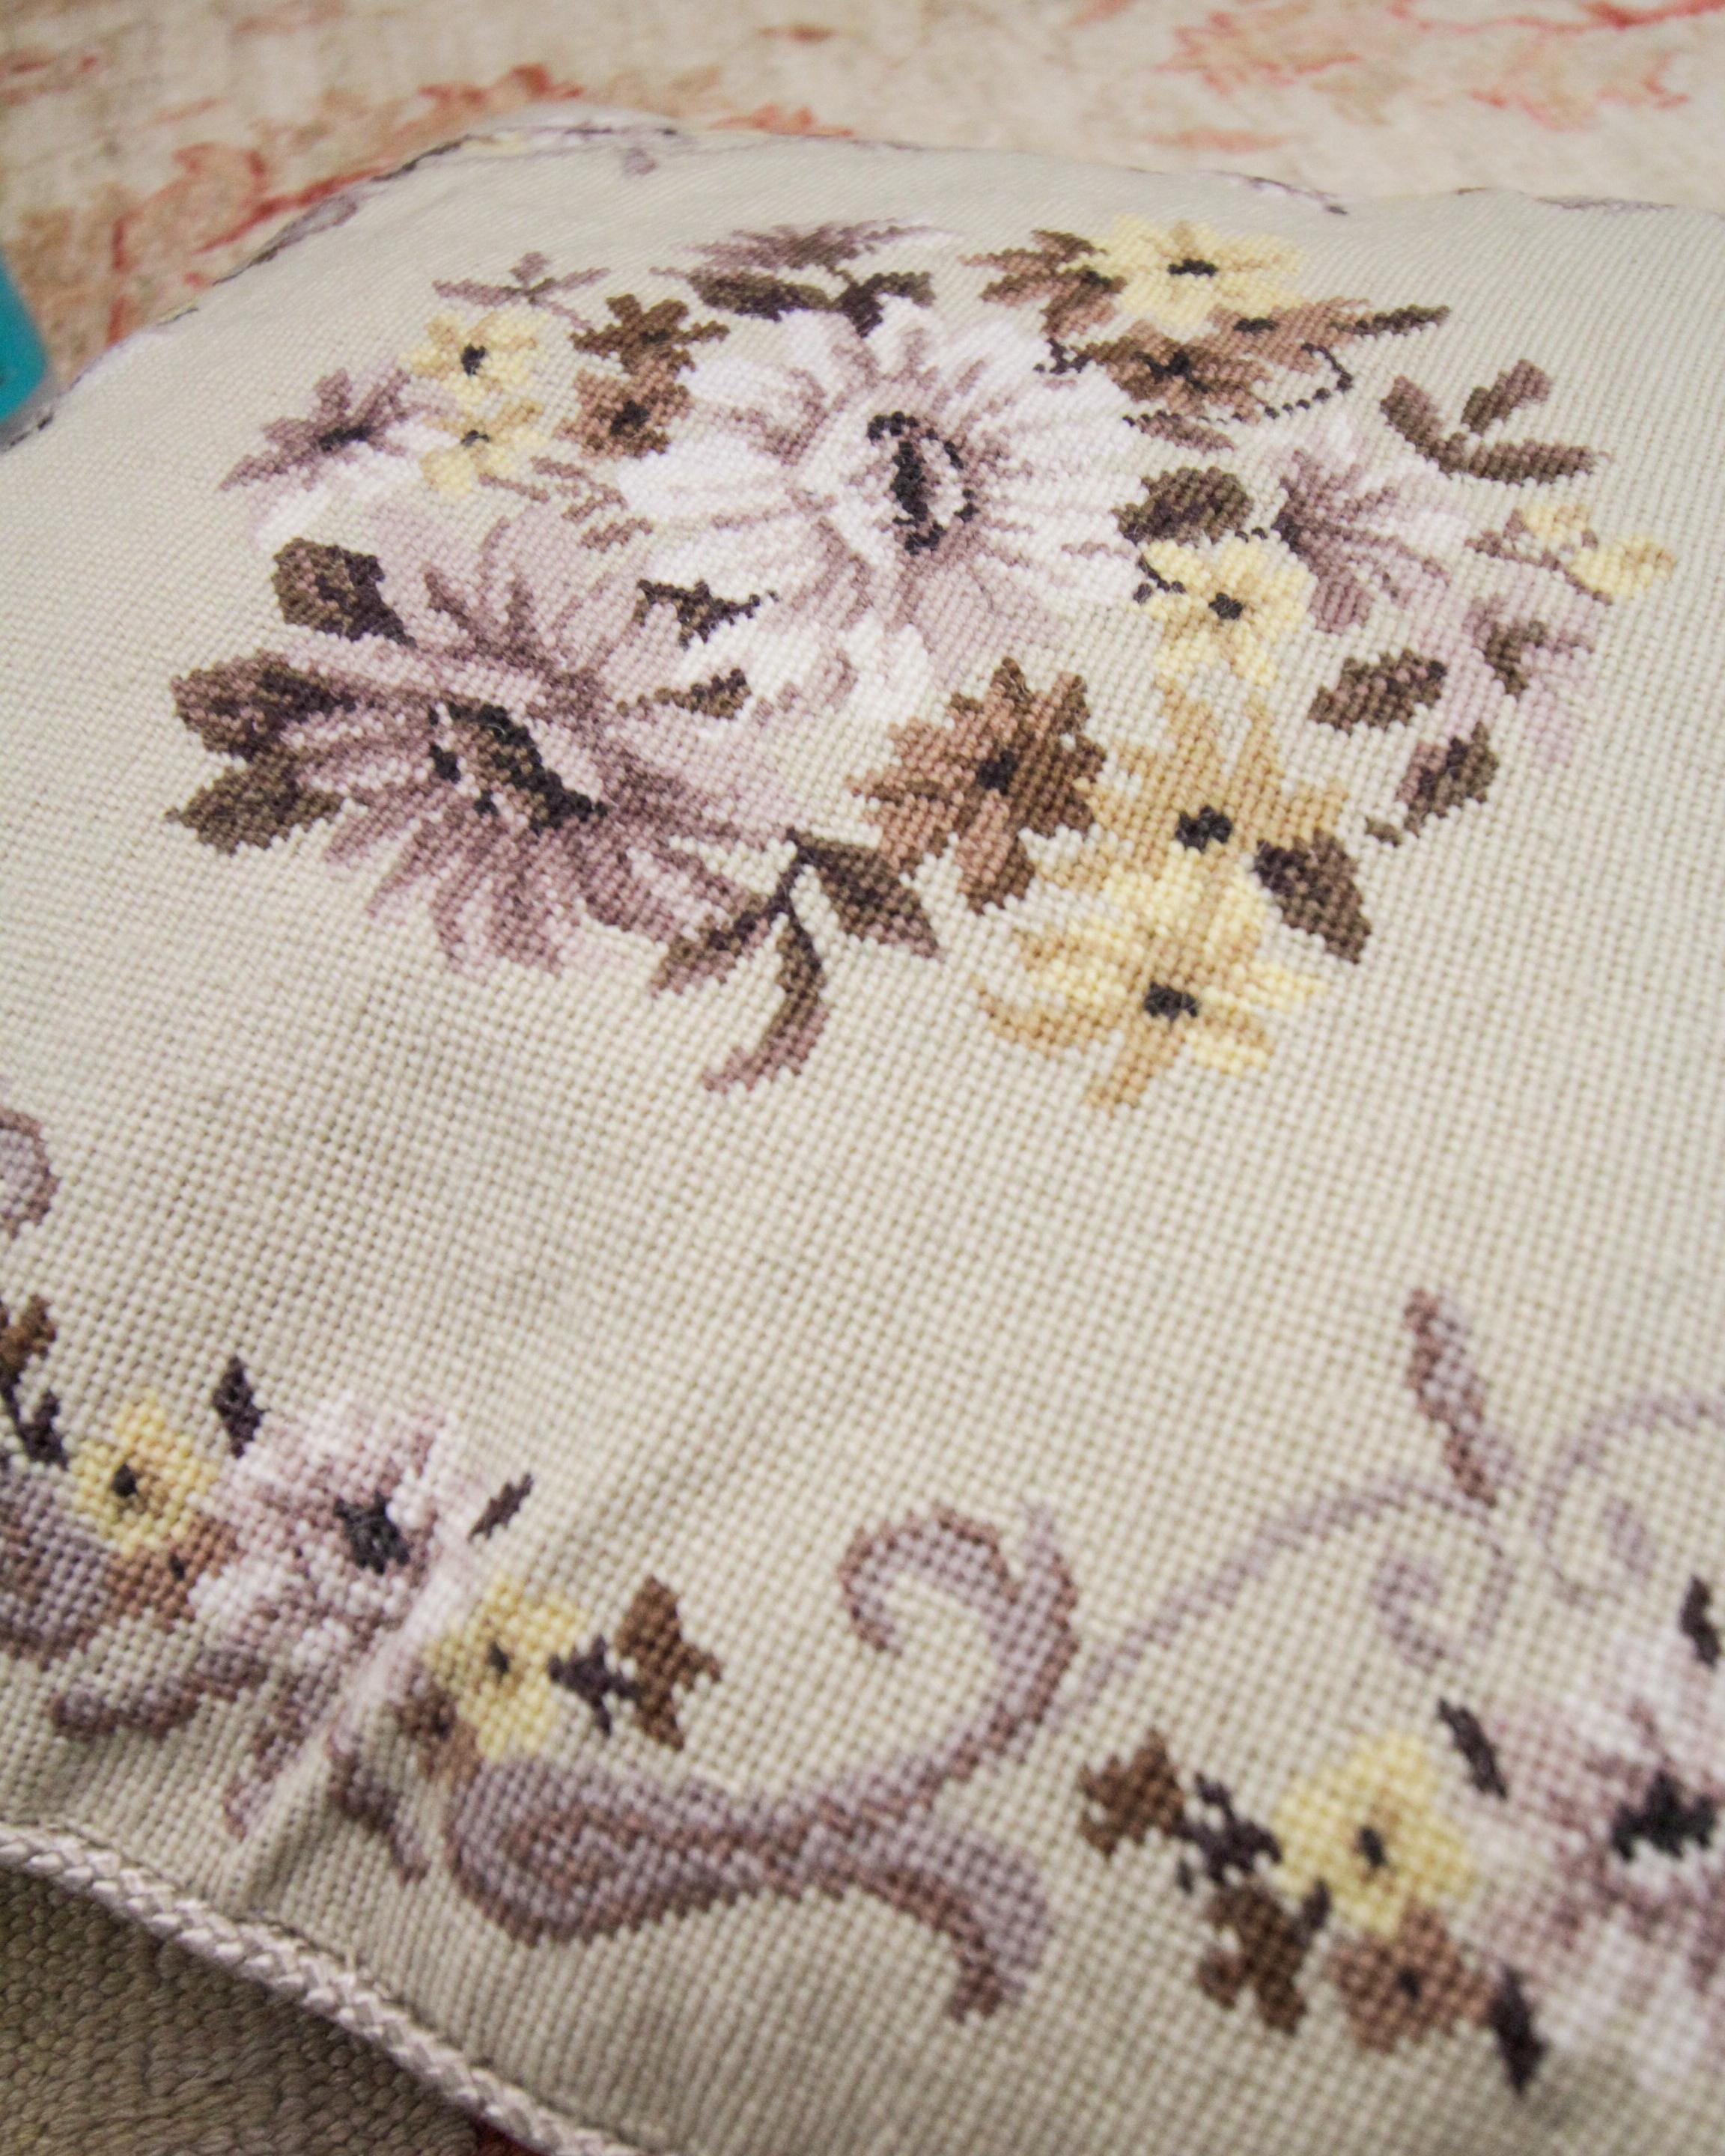 This beautifully unique floral cushion cover has been woven by hand with a floral design, woven in accents of purple, blue, orange and grey on a subtle cream background. The colour and design of this elegant hand-embroidered cushion make it the